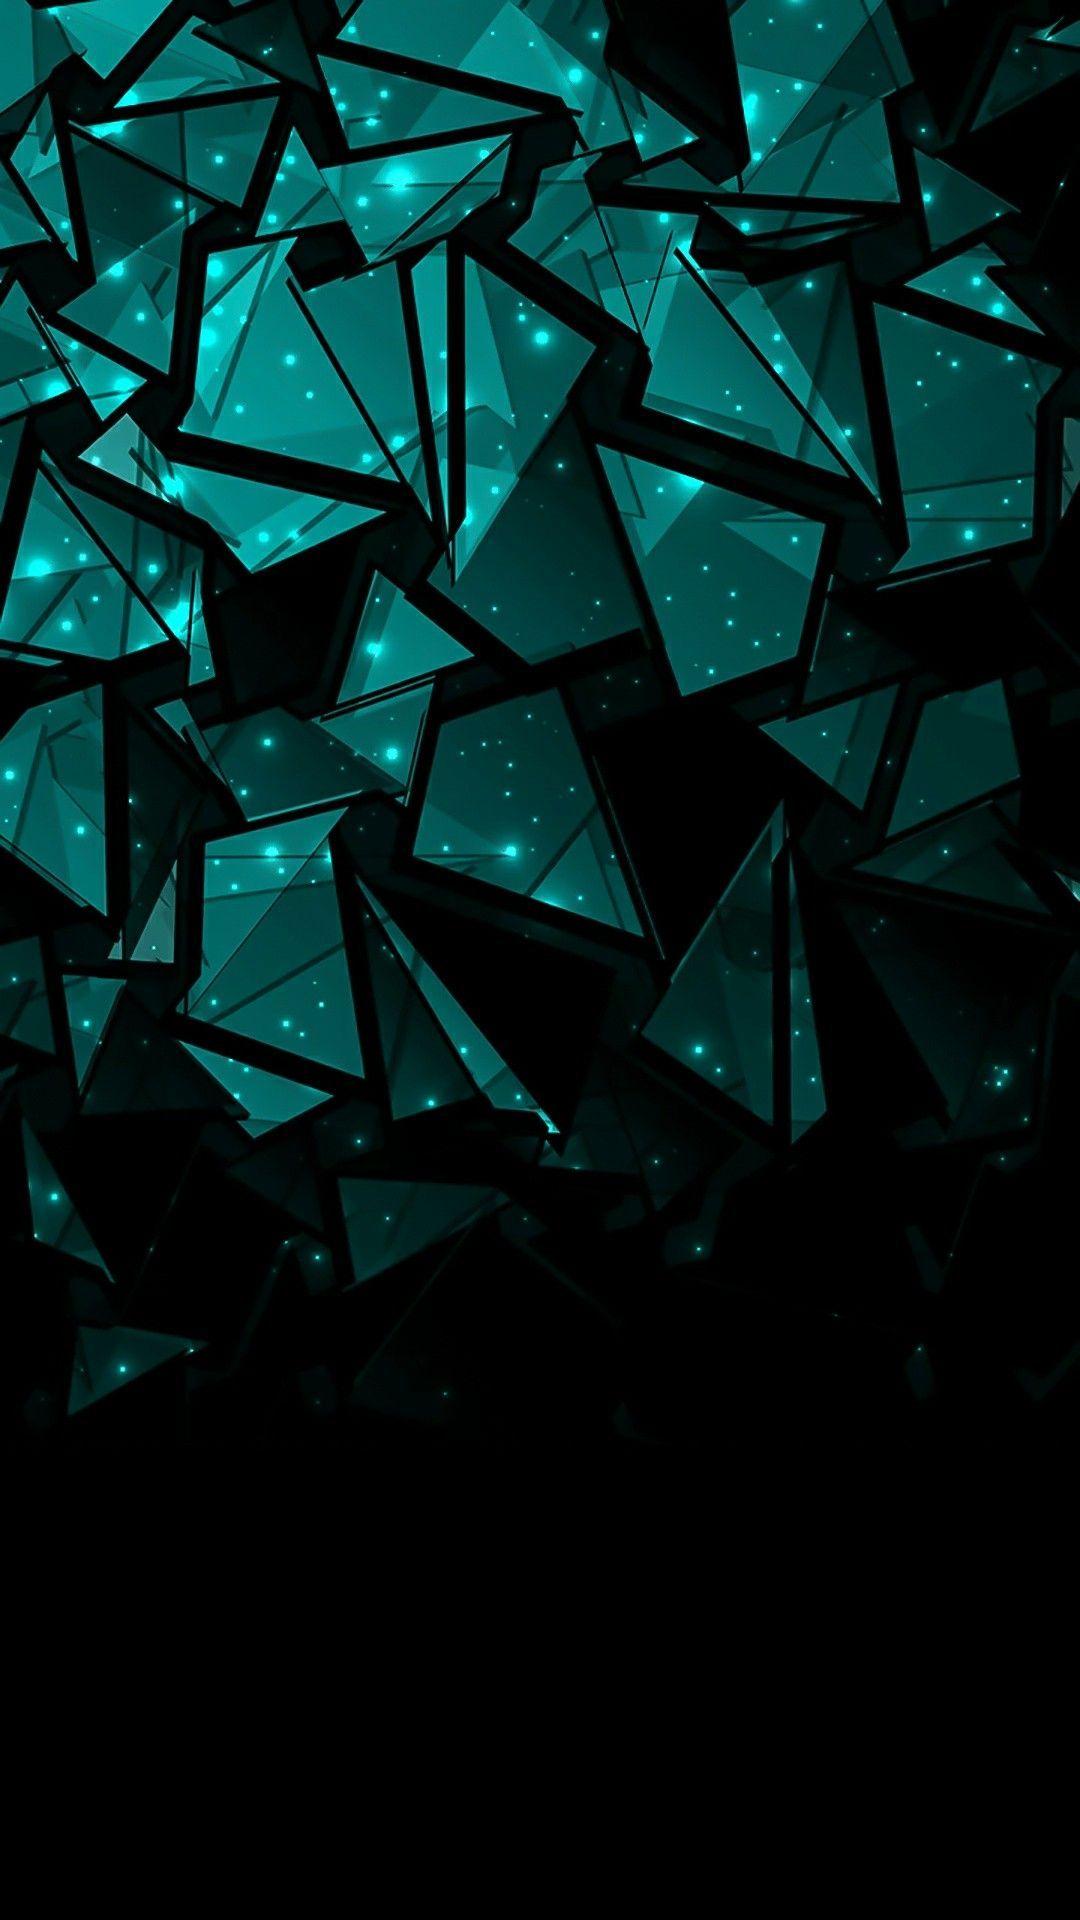 Shards of Glass. Trippy wall. Wallpaper